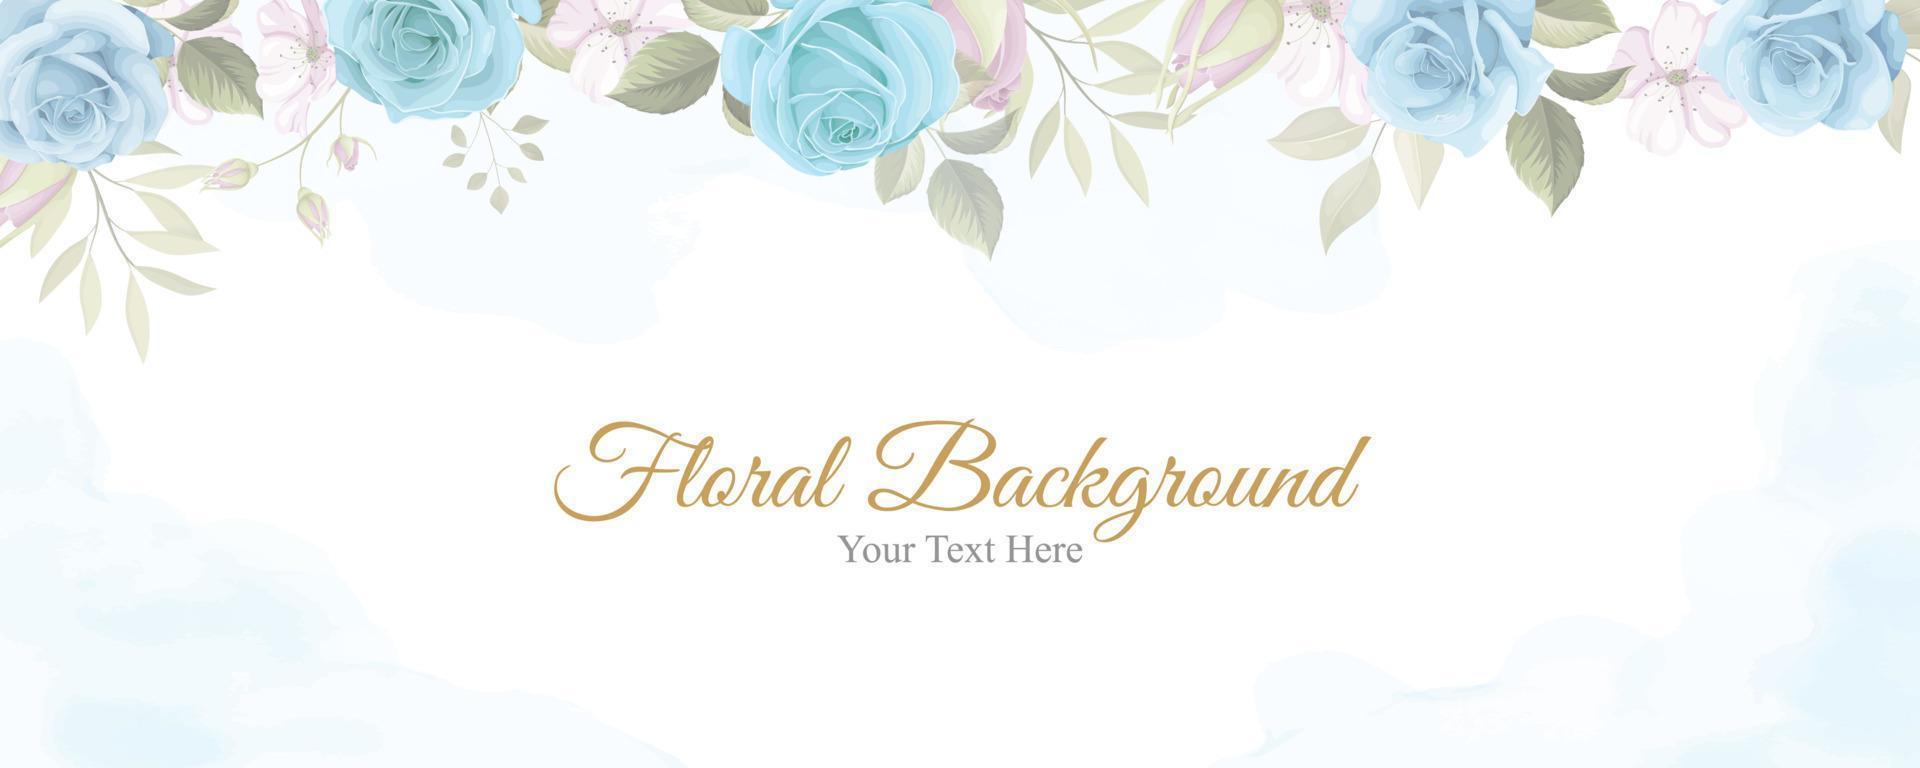 Beautiful flower banner with blue flowers vector